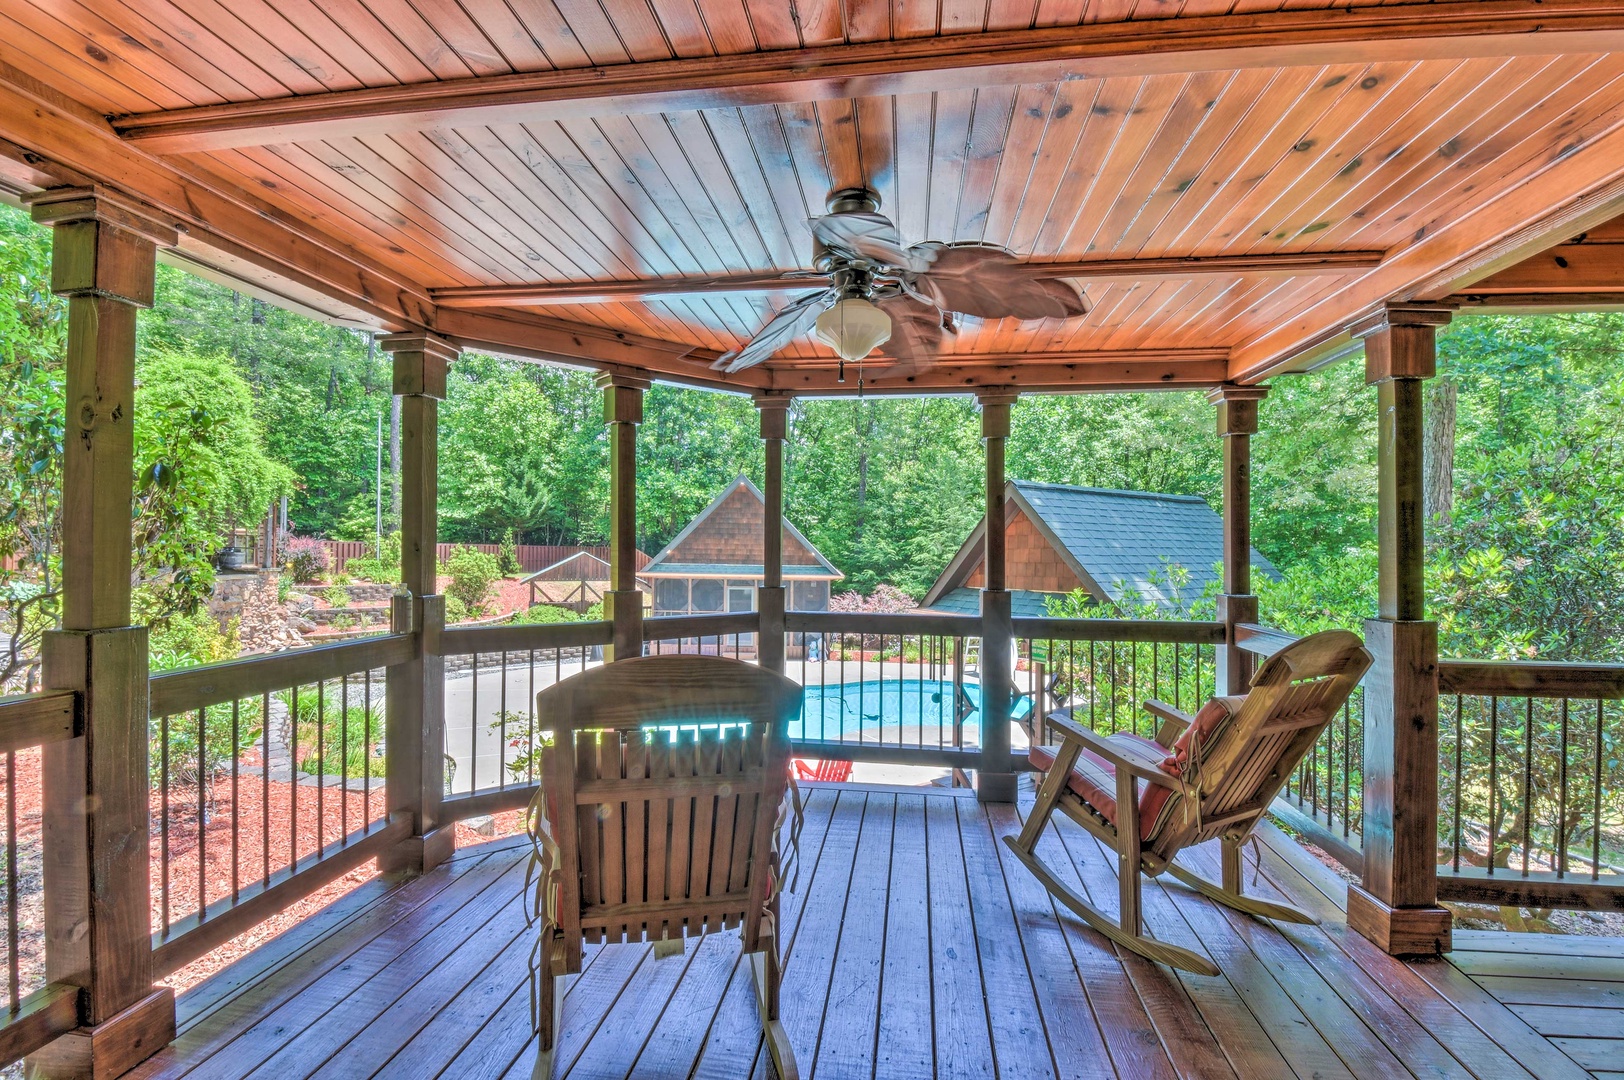 Deer Watch Lodge- Pool house view with rocking chair seating